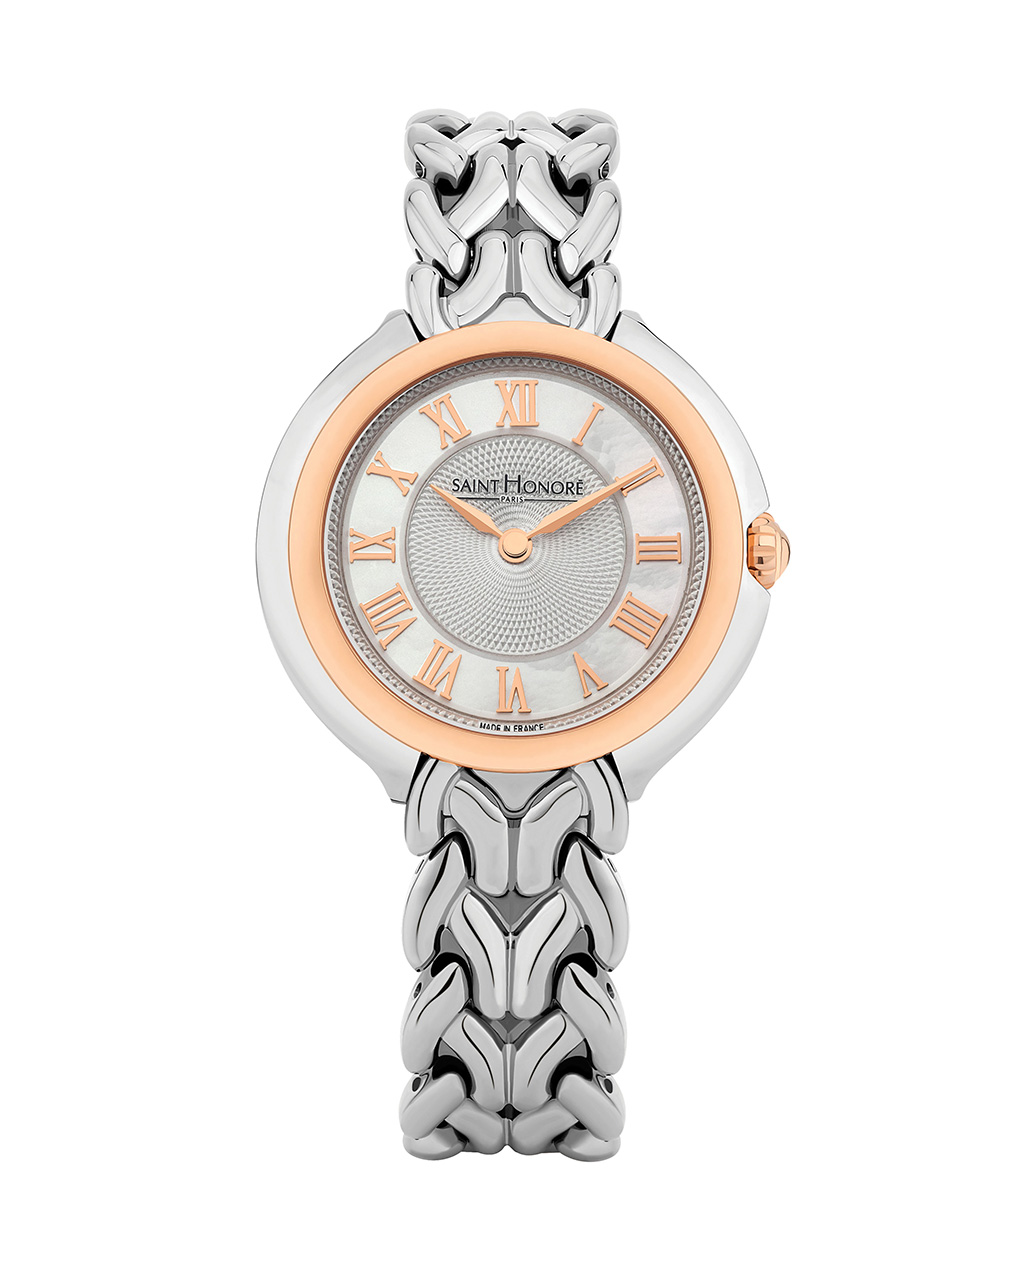 DIVINE Women's watch - Two-tone, ion plating rose gold case, white dial, stainless steel strap